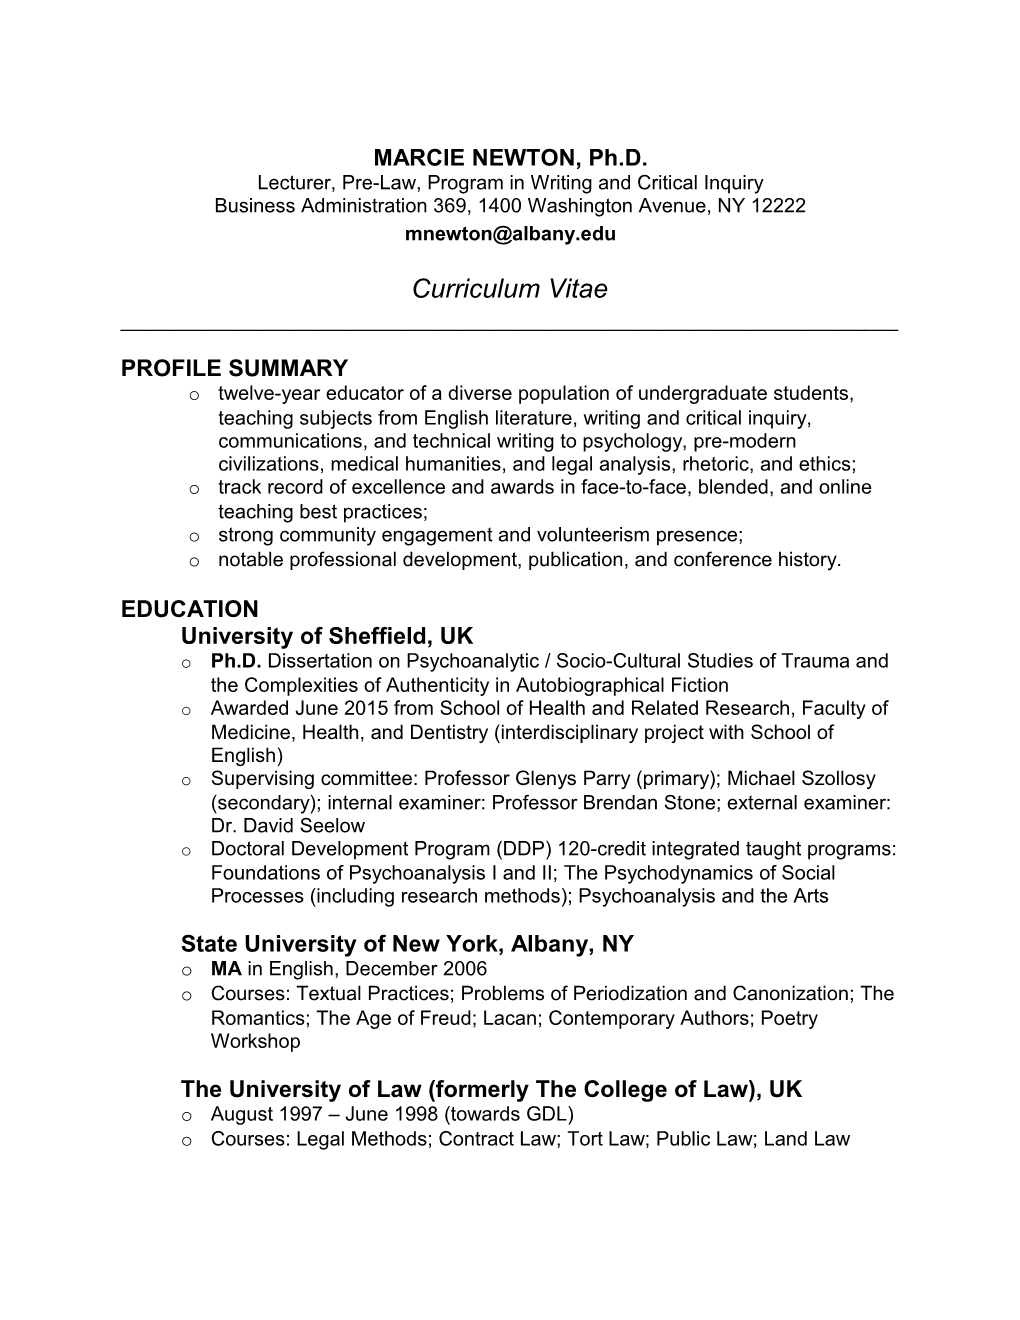 Lecturer, Pre-Law, Program in Writing and Critical Inquiry